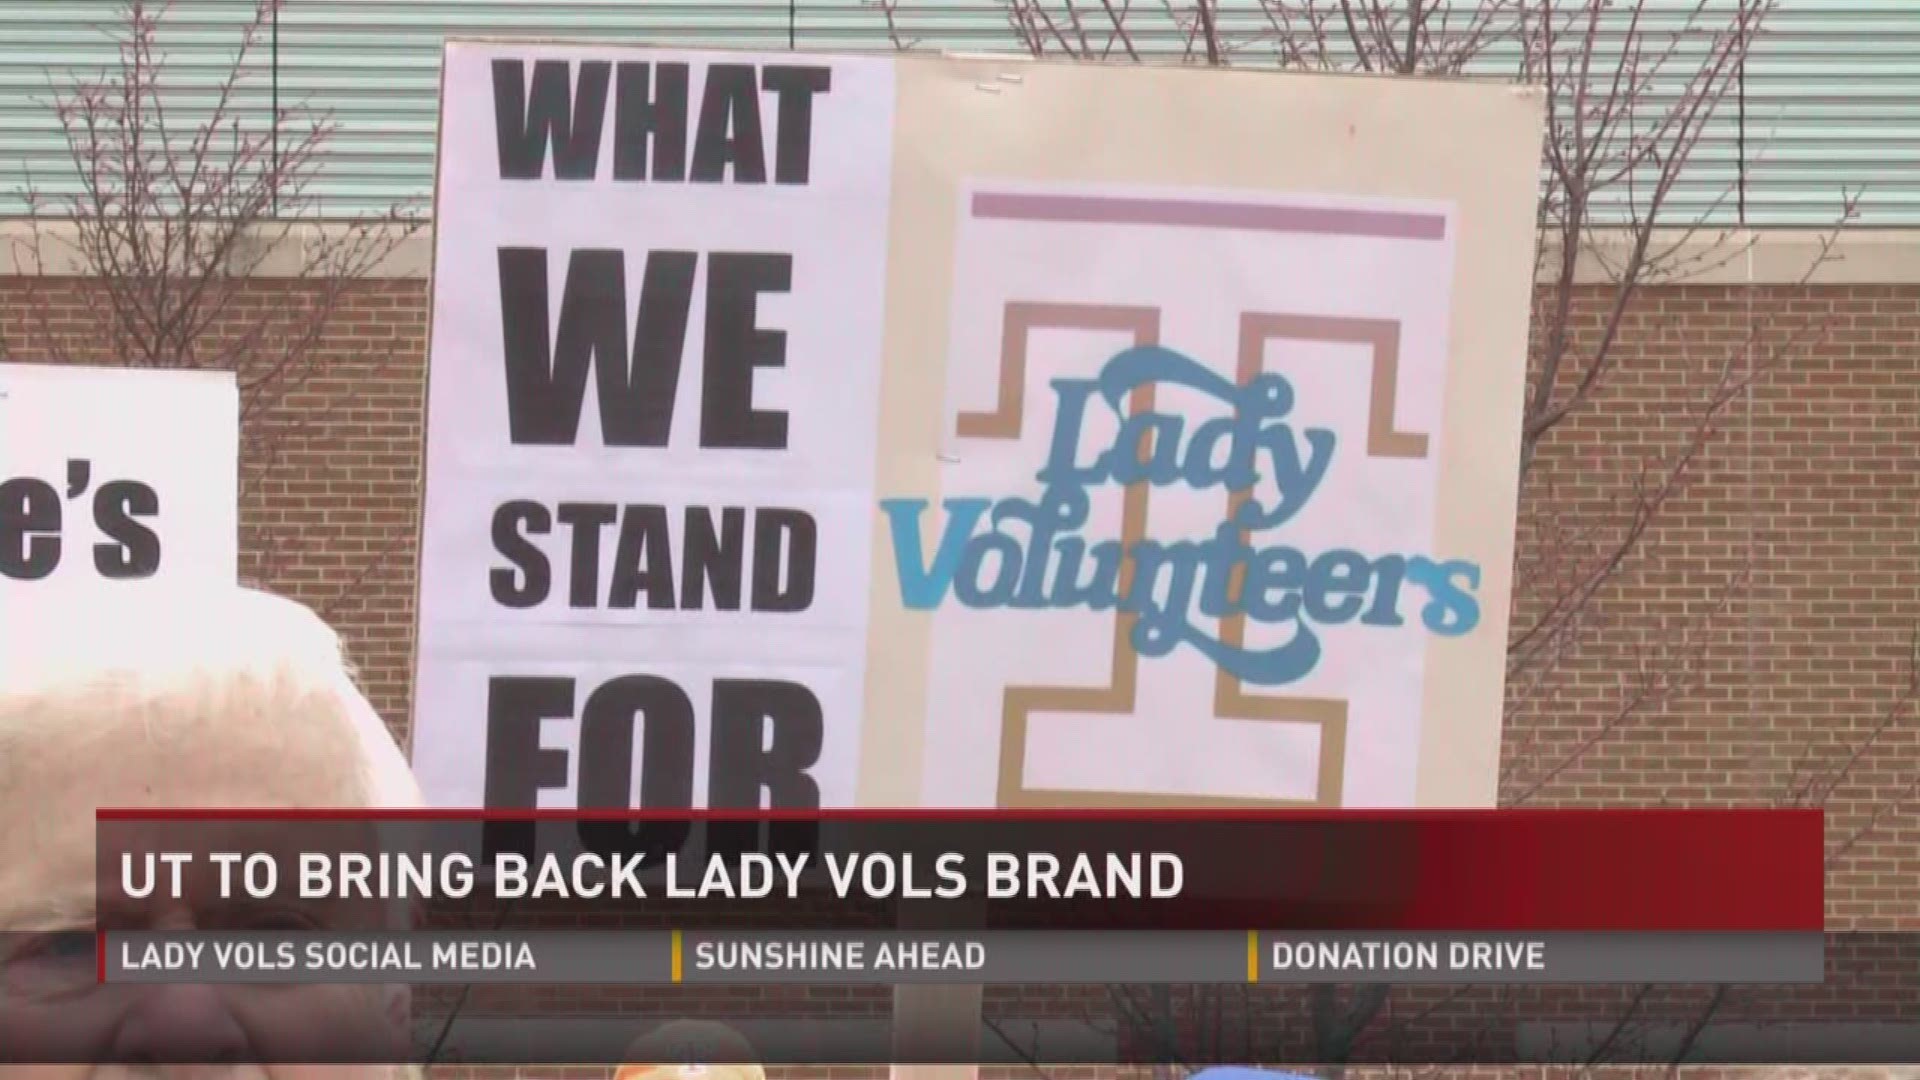 After nearly three years, UT is bringing attention back to the Lady Vols logo and brand.